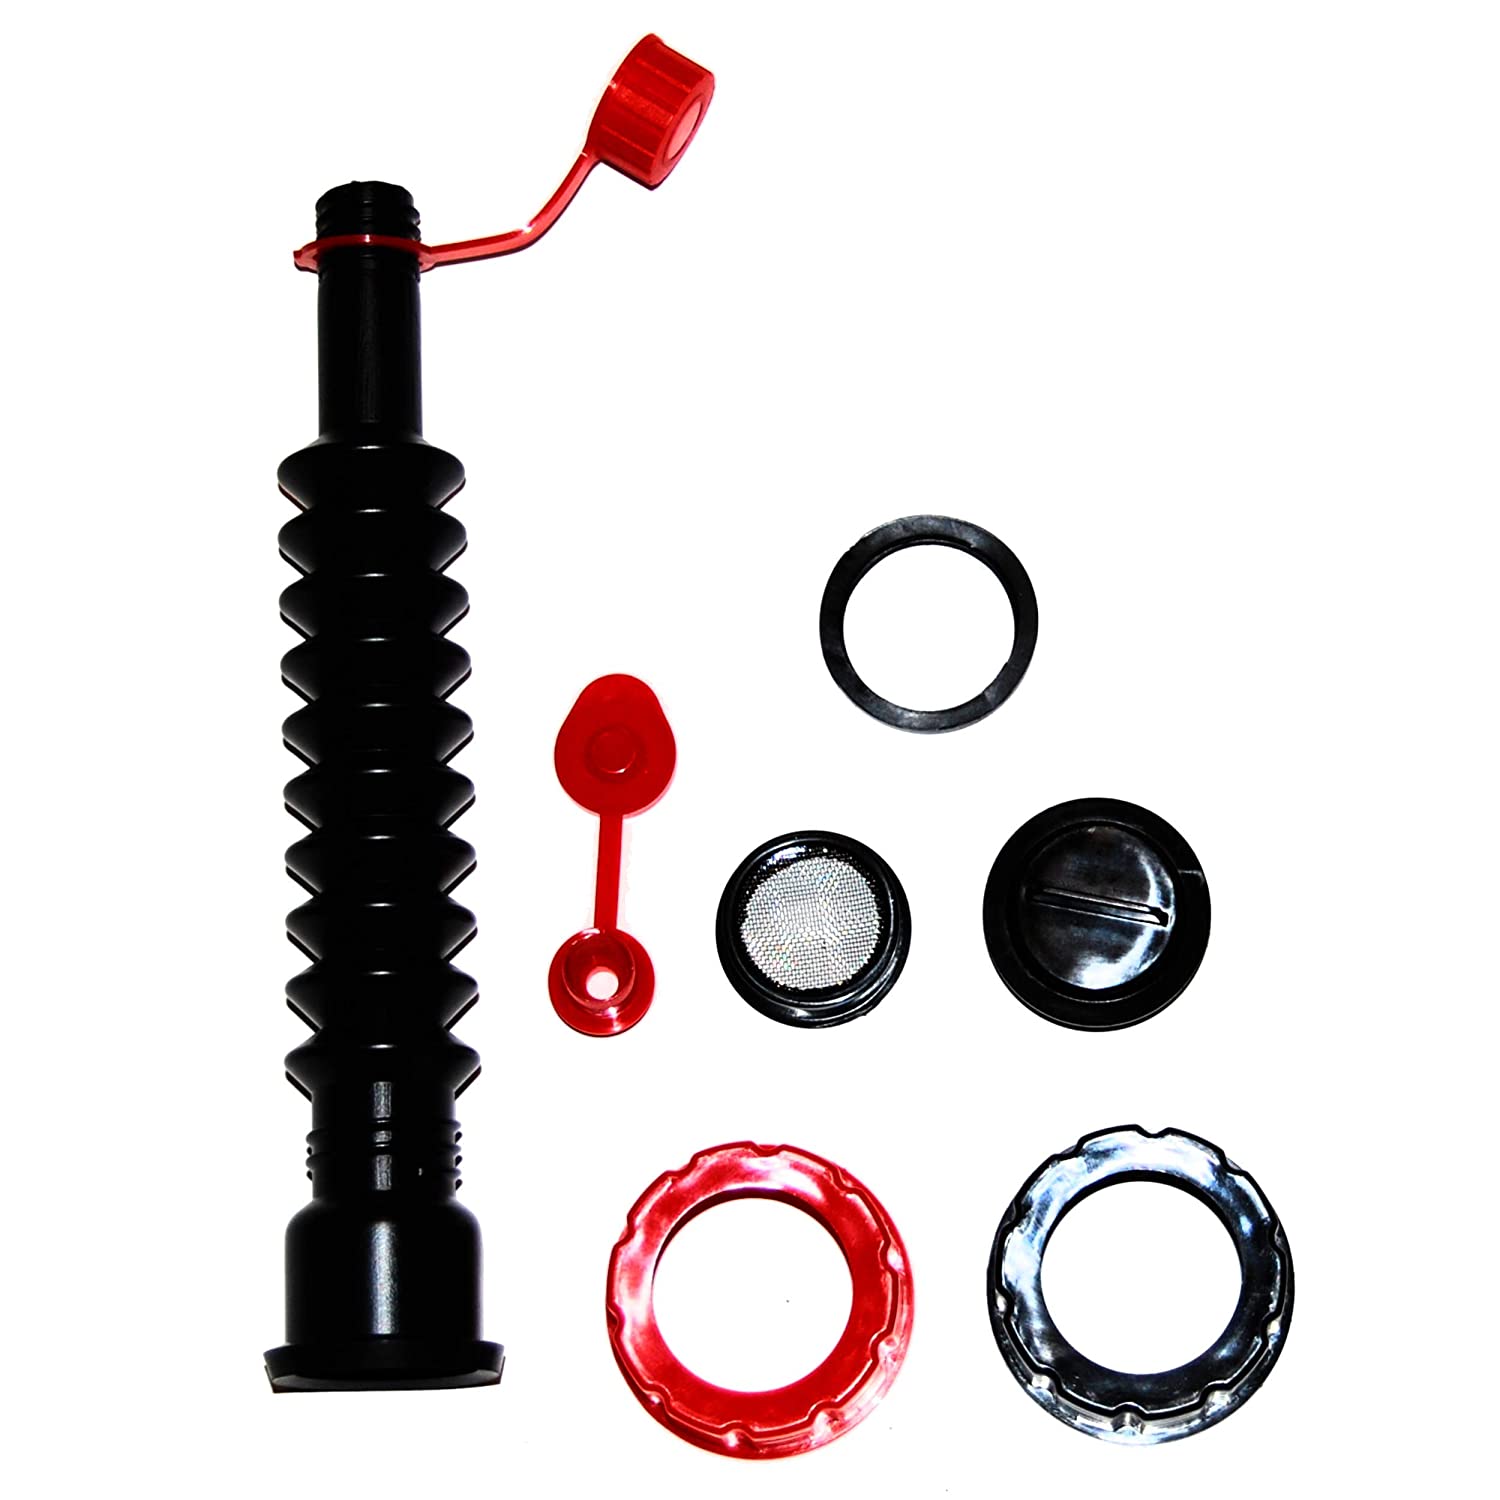 Gas Can Spout Replacement, Gas Can Nozzle Kit with Screw Collar Caps,  Gasket Stopper,and 2 Kinds Gas Can Vent Cap for Most Style Gas Can, Highly